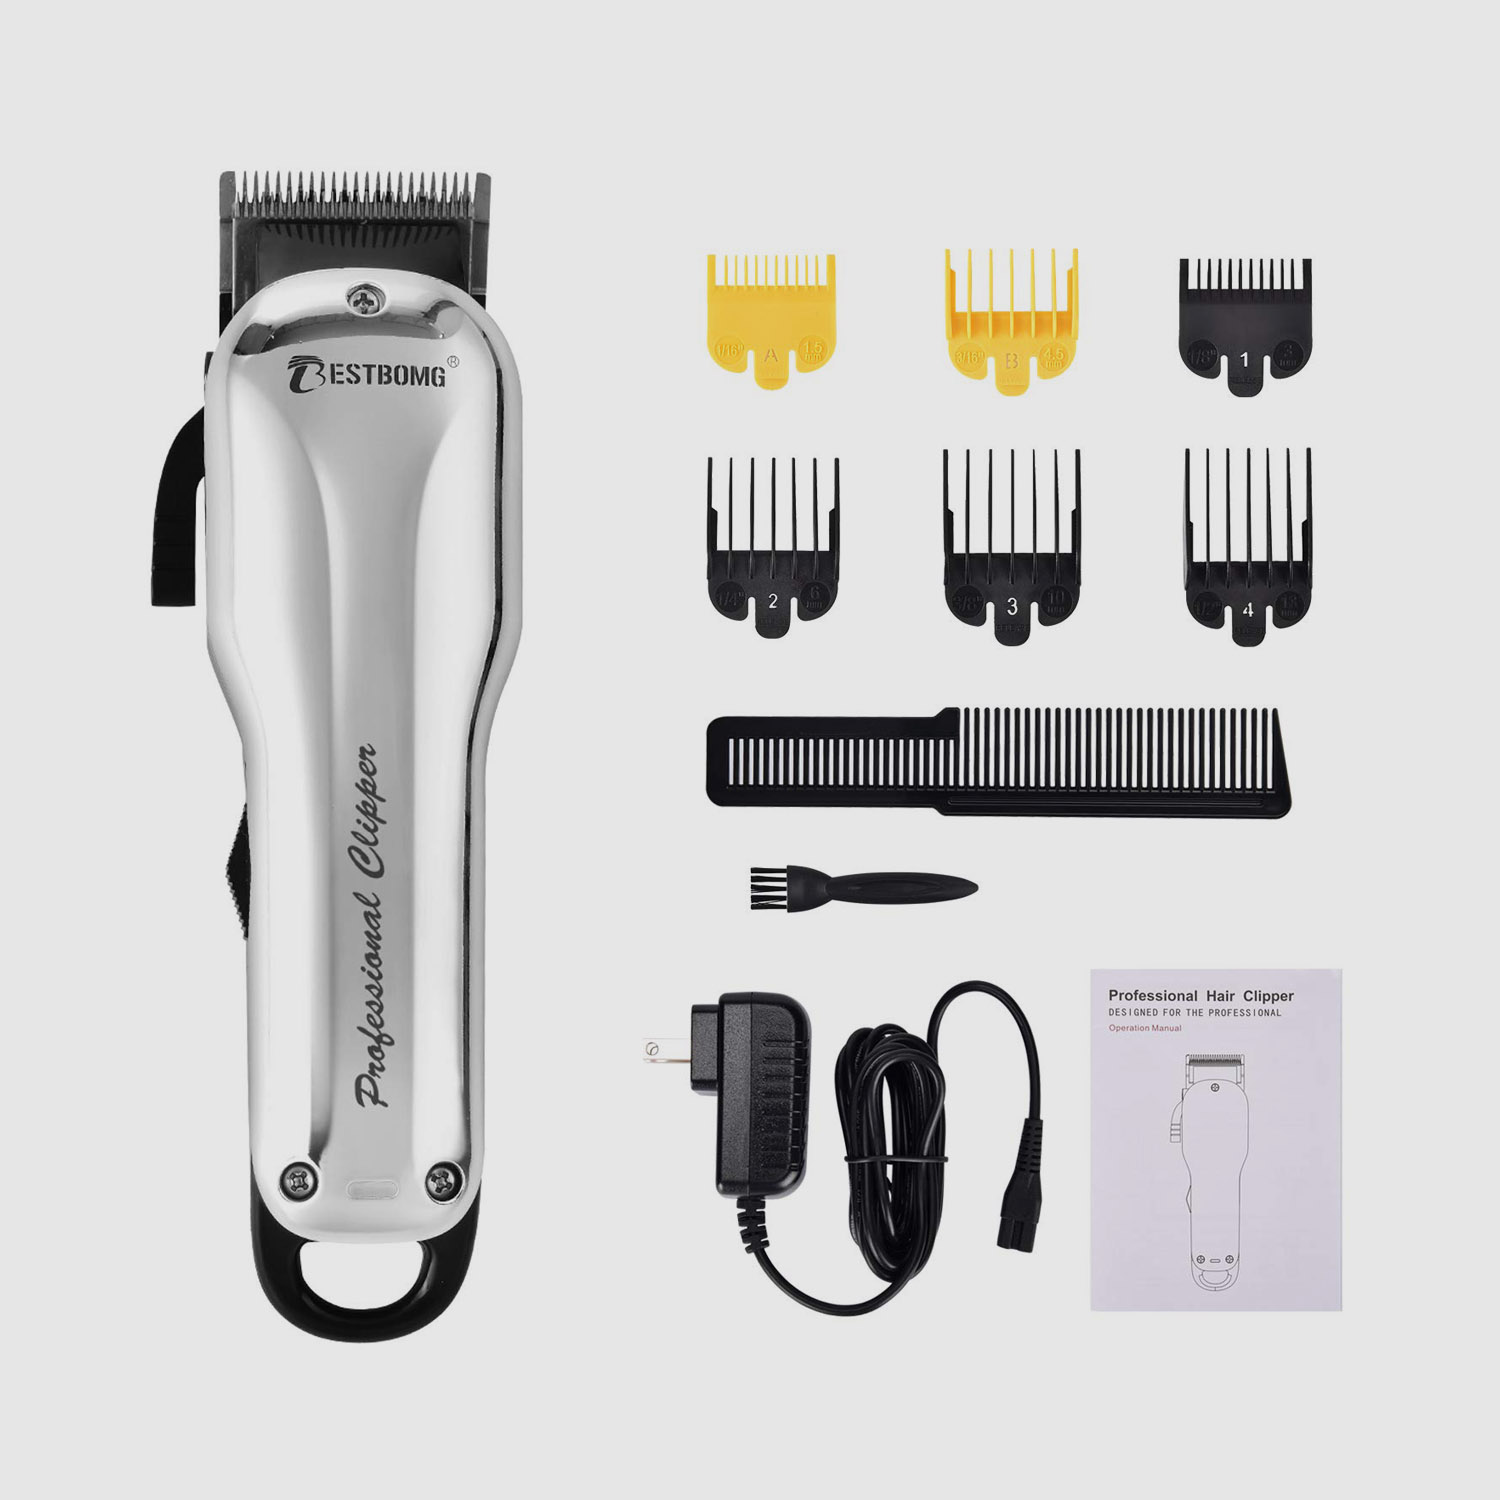 Which is better for baby electric hair clipper?